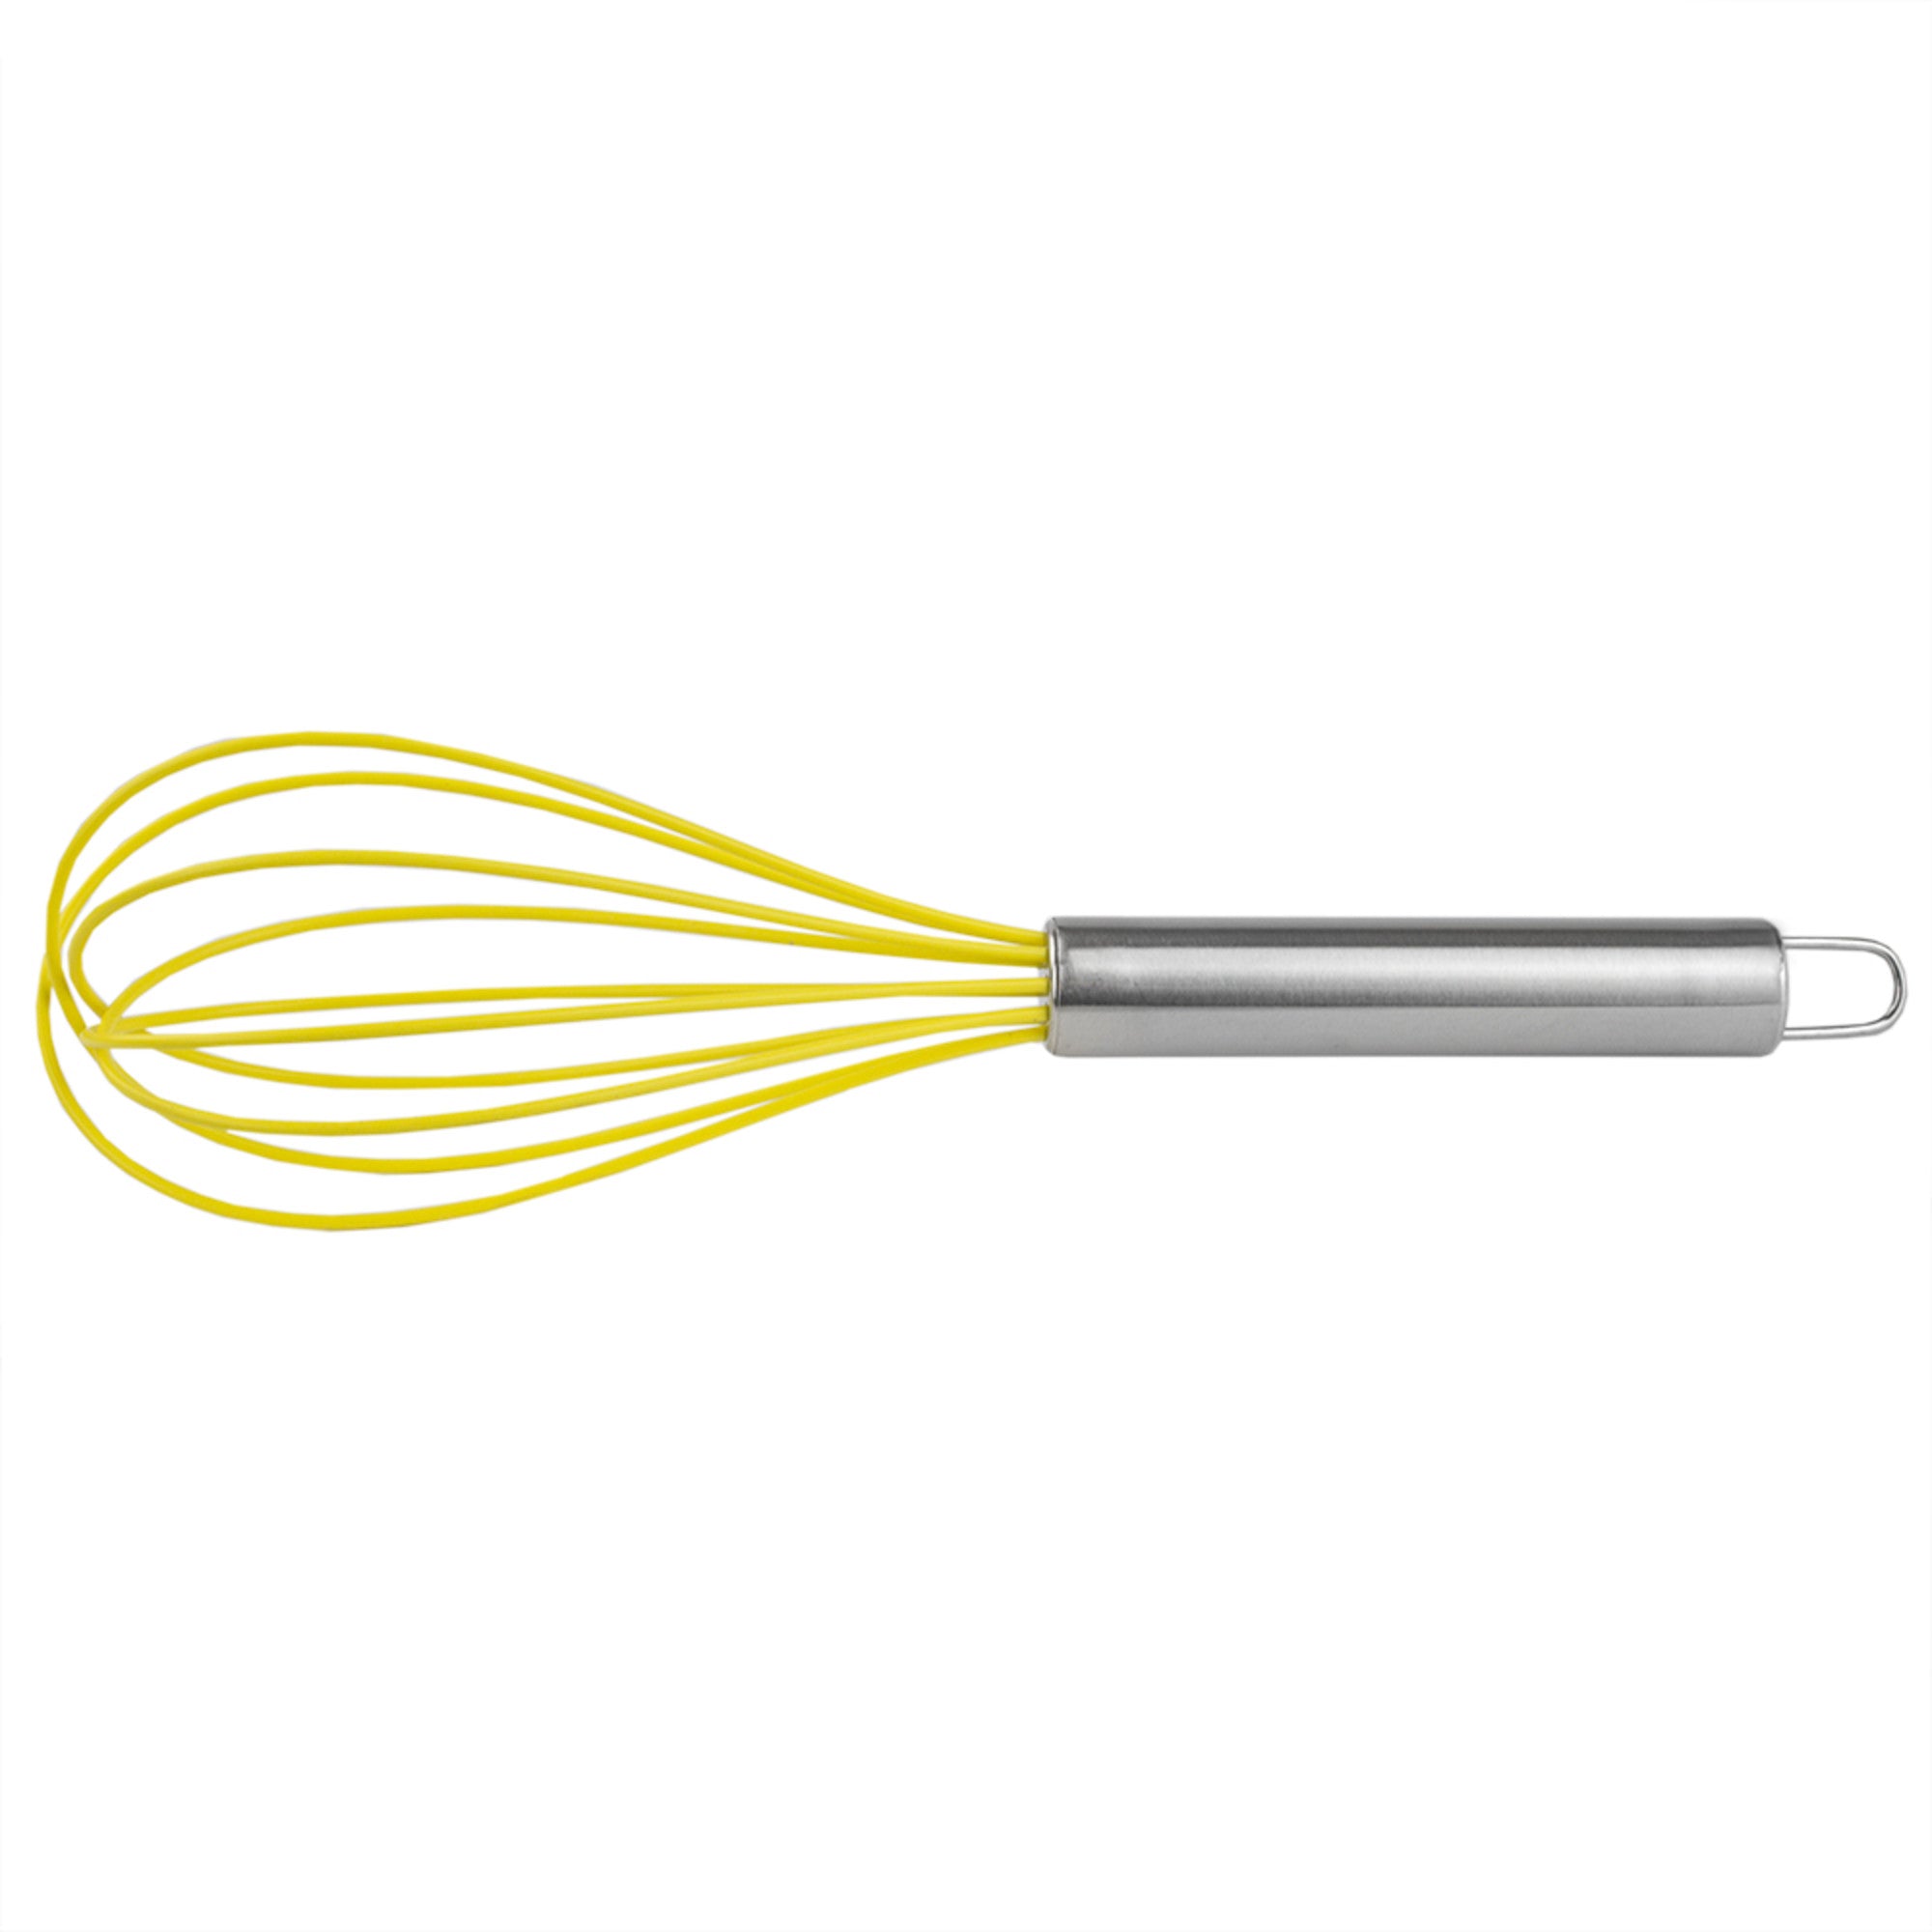 Home Basics Silicone Balloon Whisk with Steel Handle